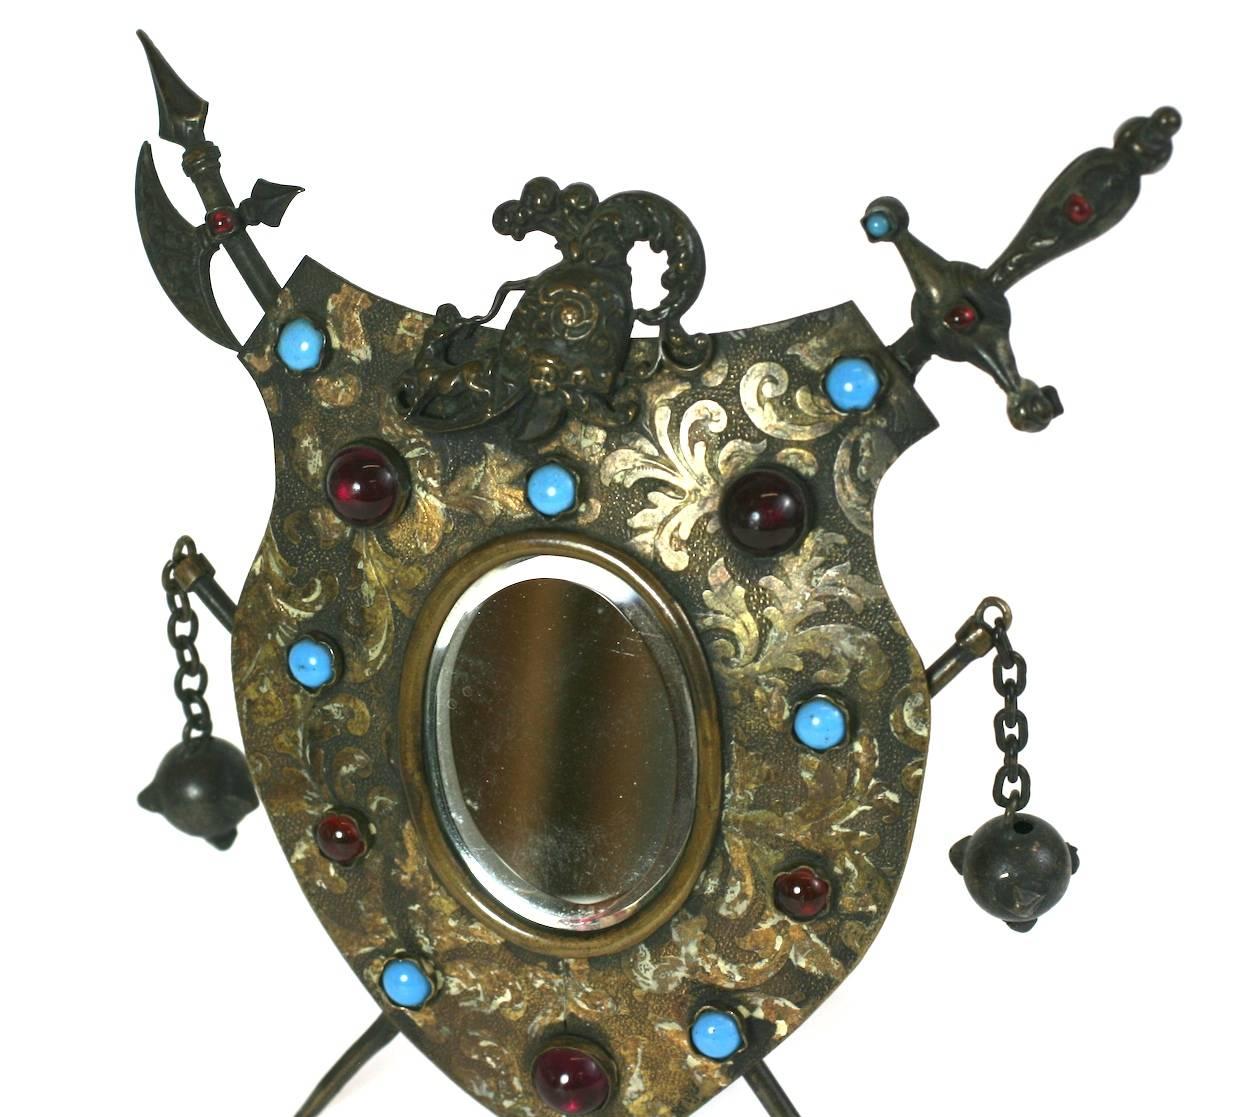 Super charming miniature mirror in a shield form with jeweled garnet and turquoise glass accents from the late 19th Century. Sword and Axe motifs form the cross legs with ominous spiked ball weaponry dangling from each side.
A knight's helmet caps